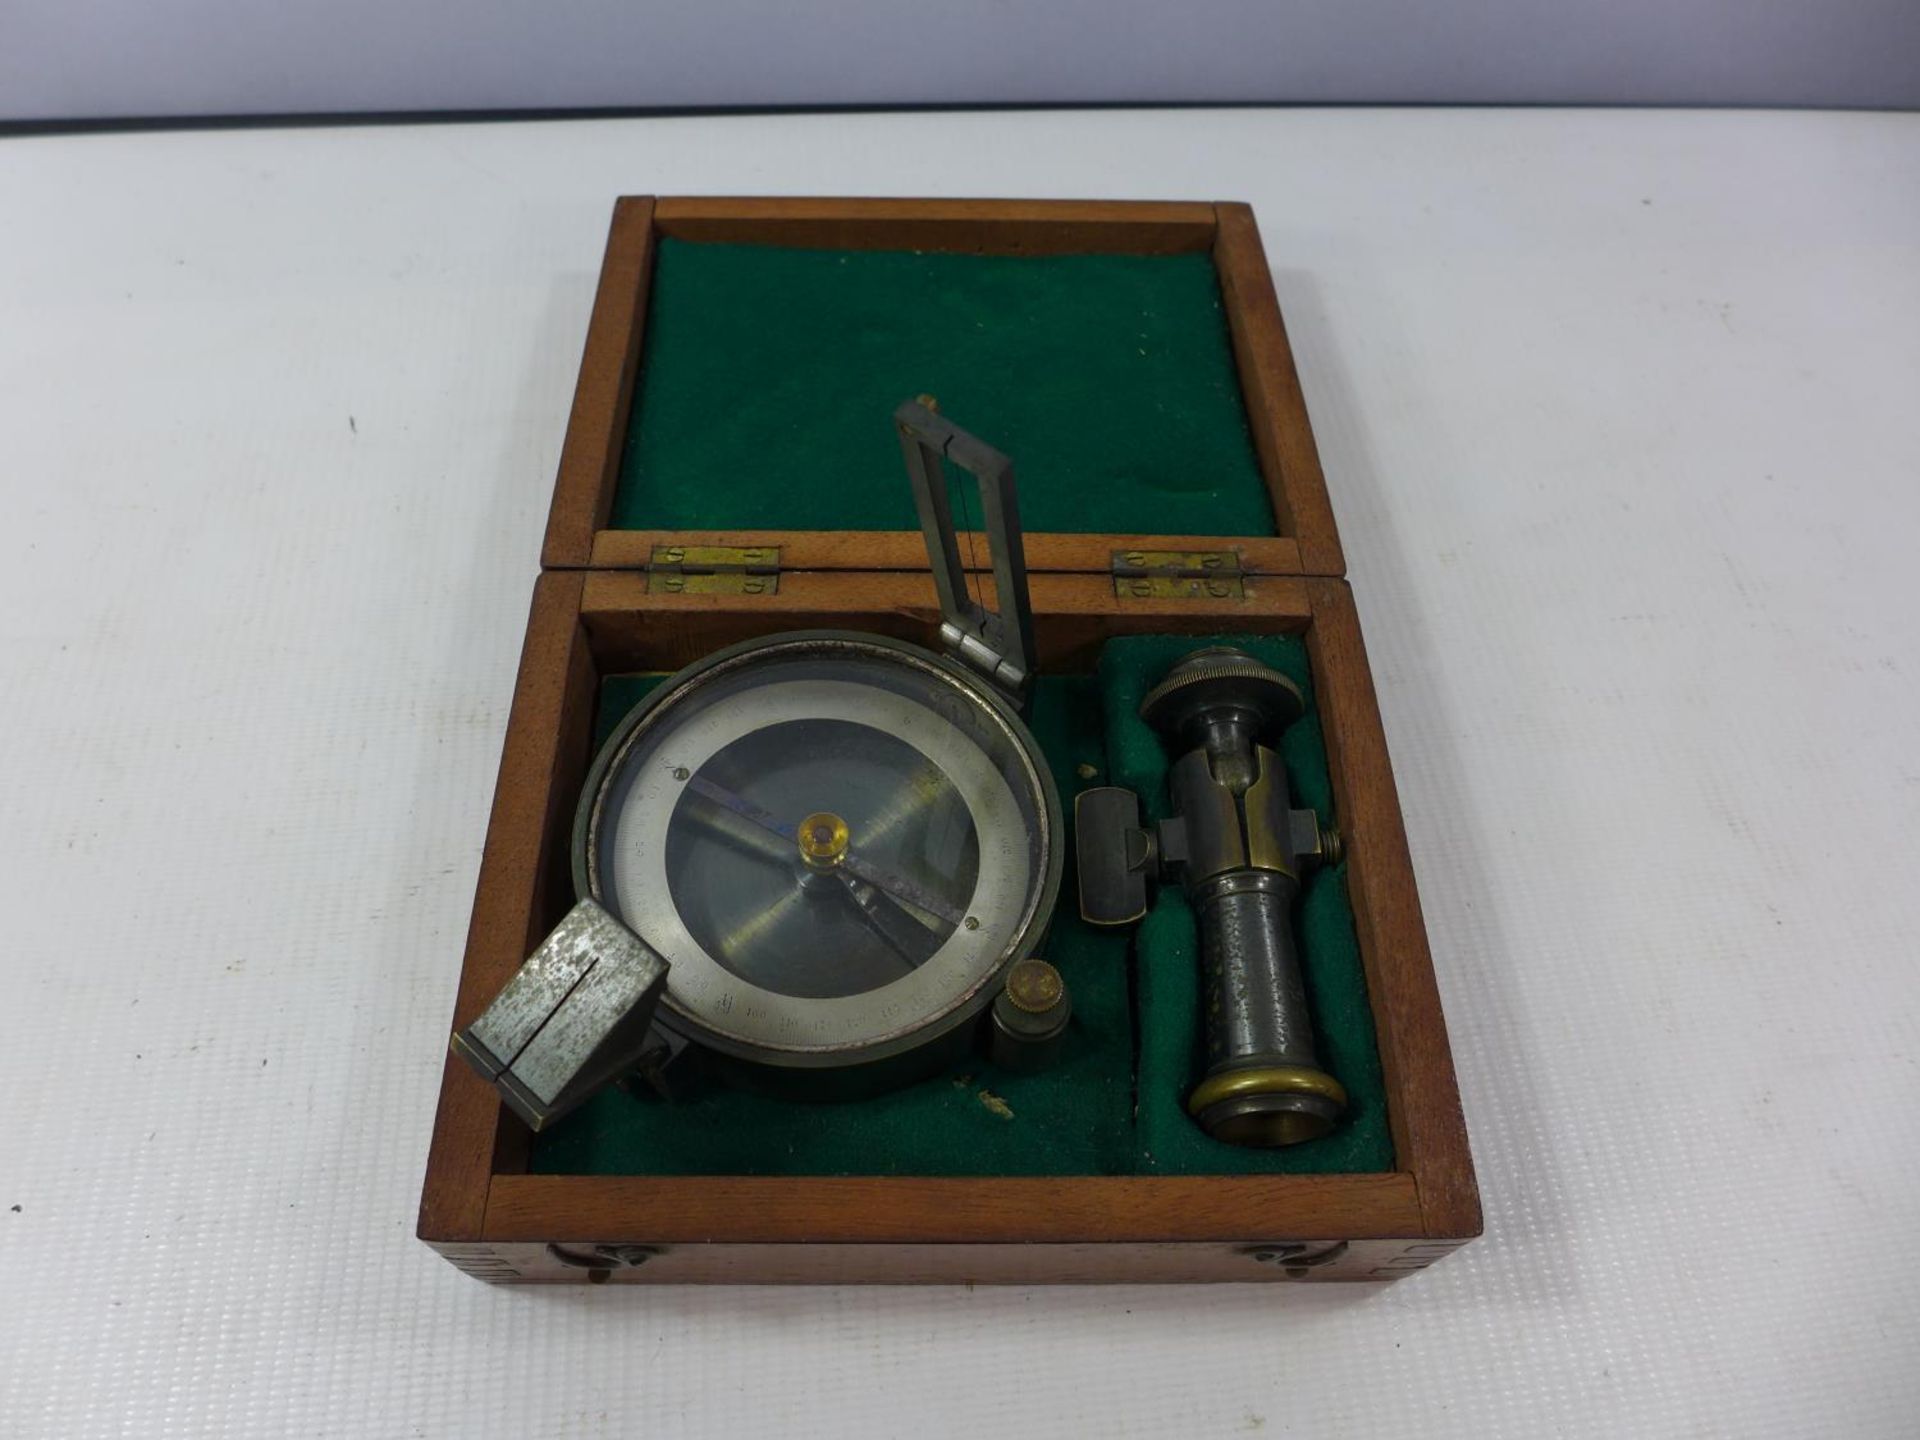 A CASED COMPASS AND STAND ATTACHMENTS, FACE DIAMETER 8CM